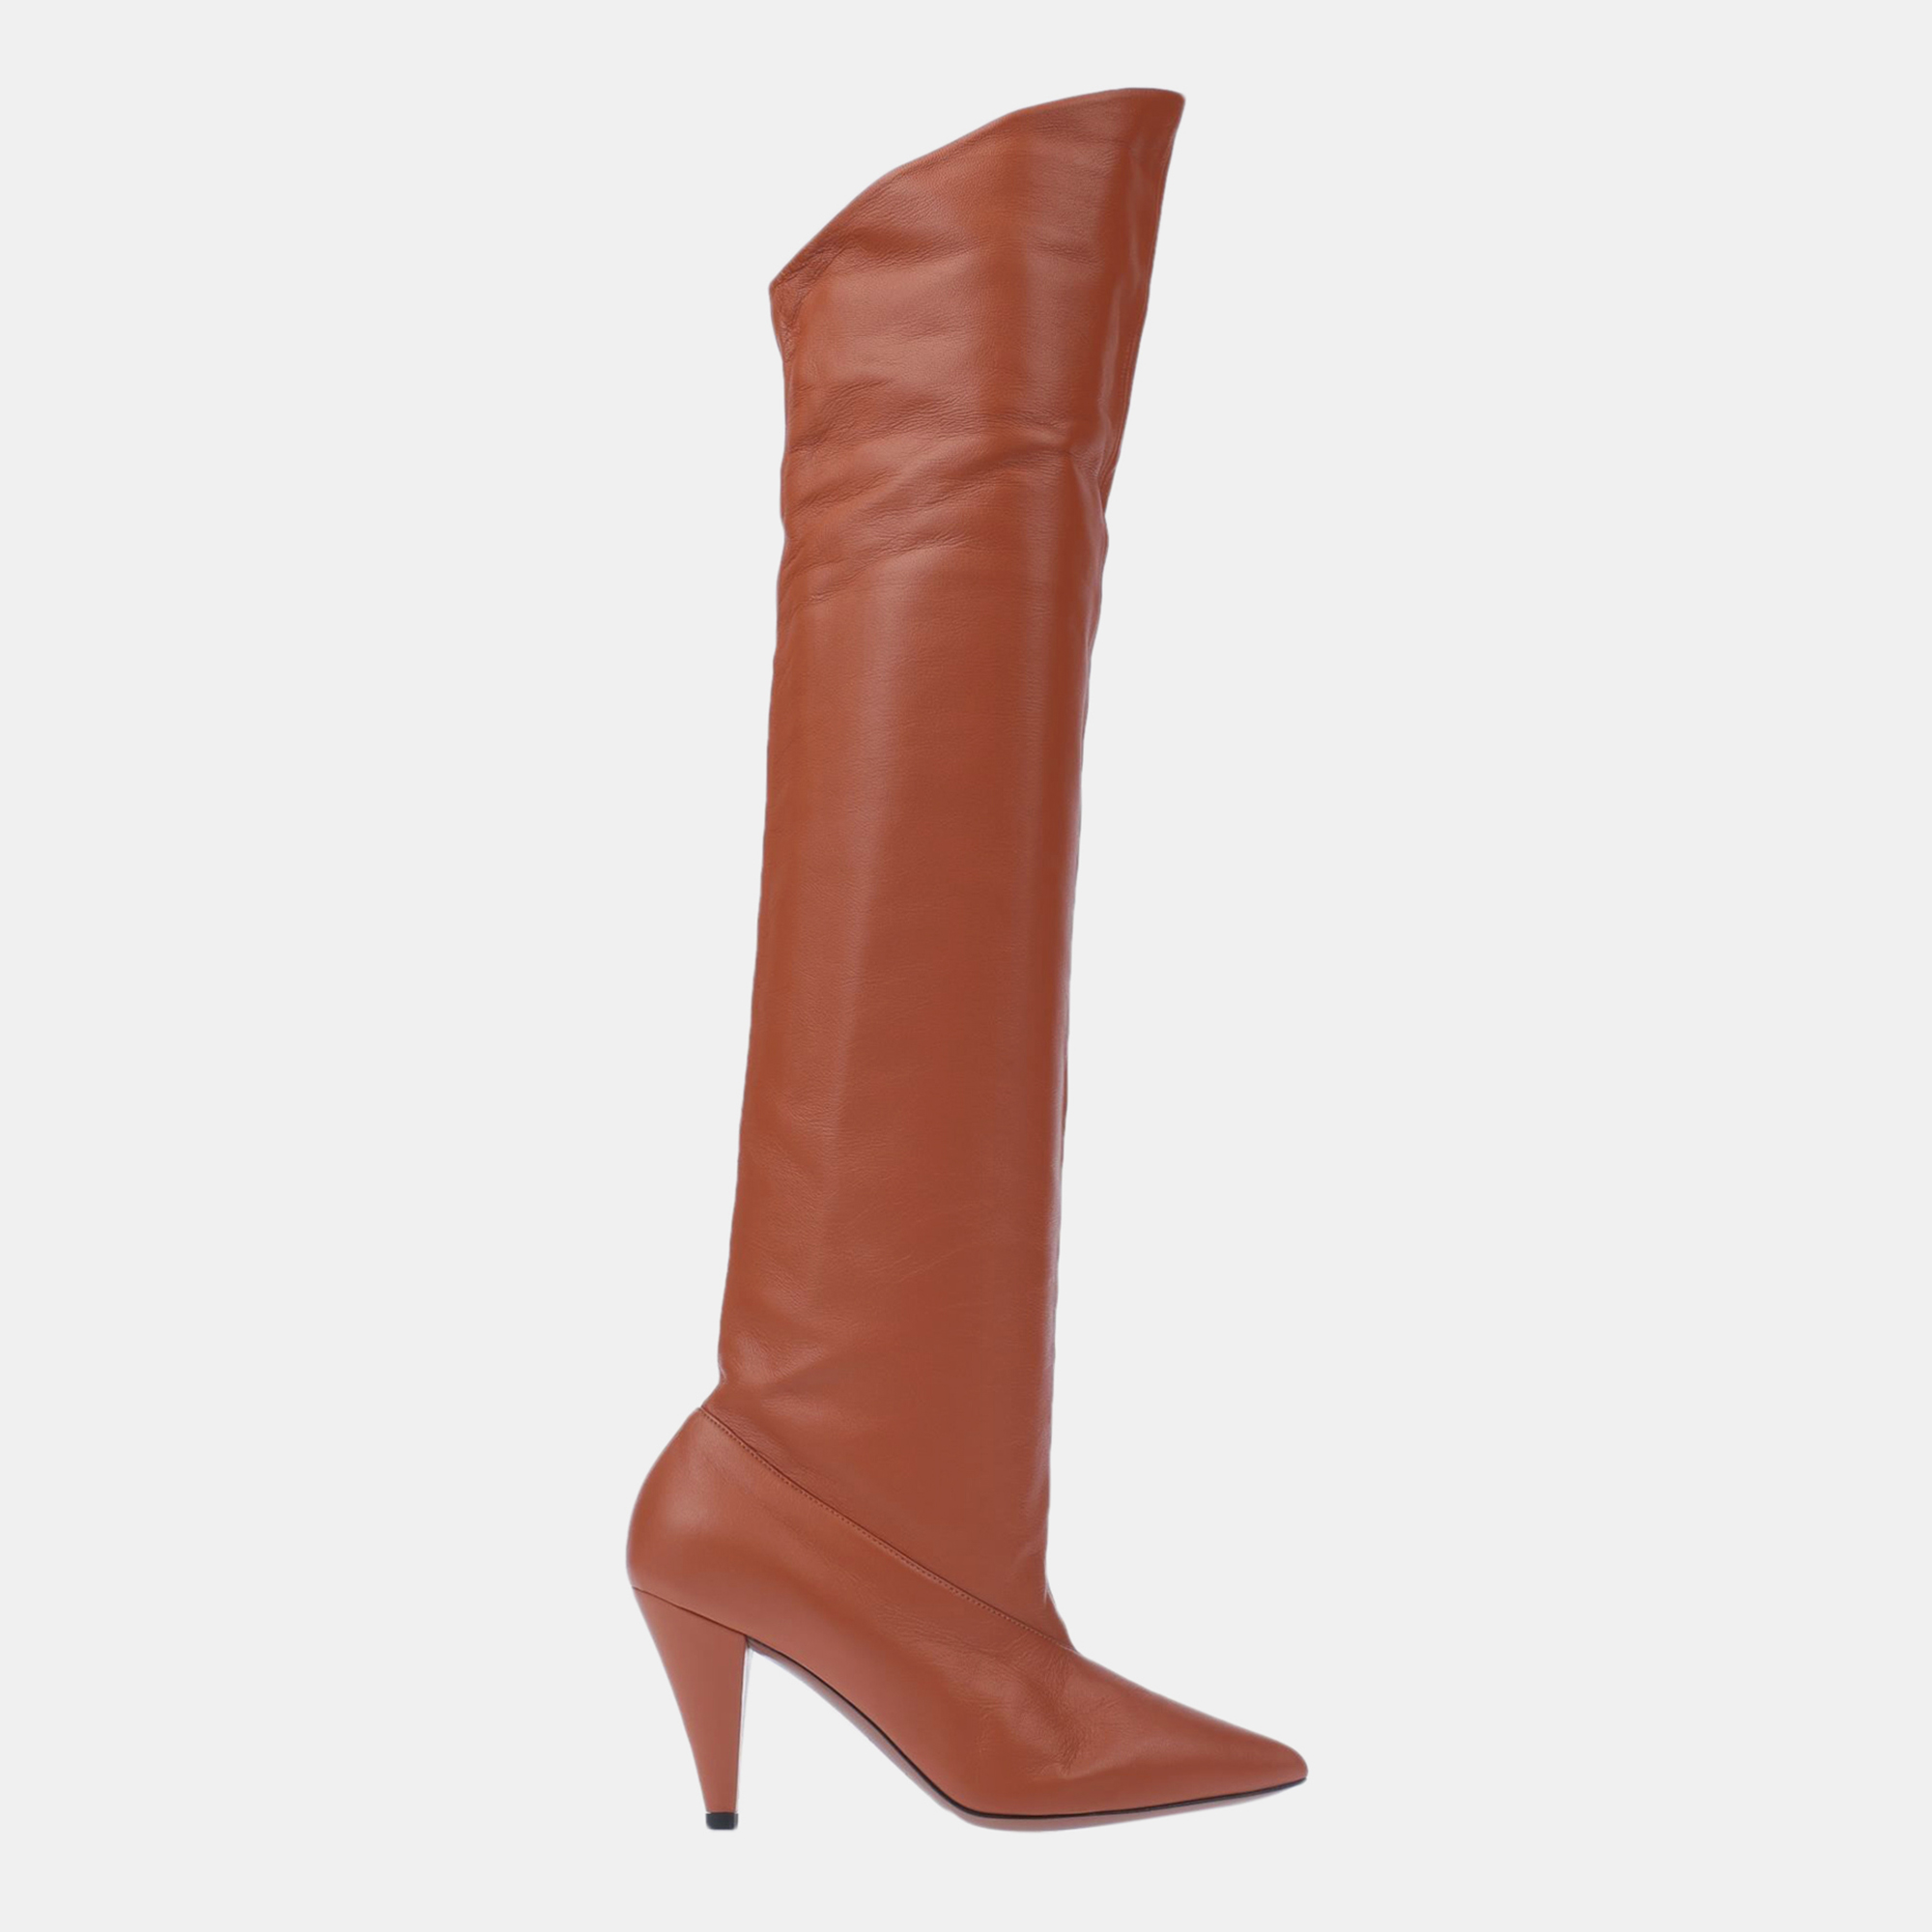 Givenchy leather over the knee boots size 41